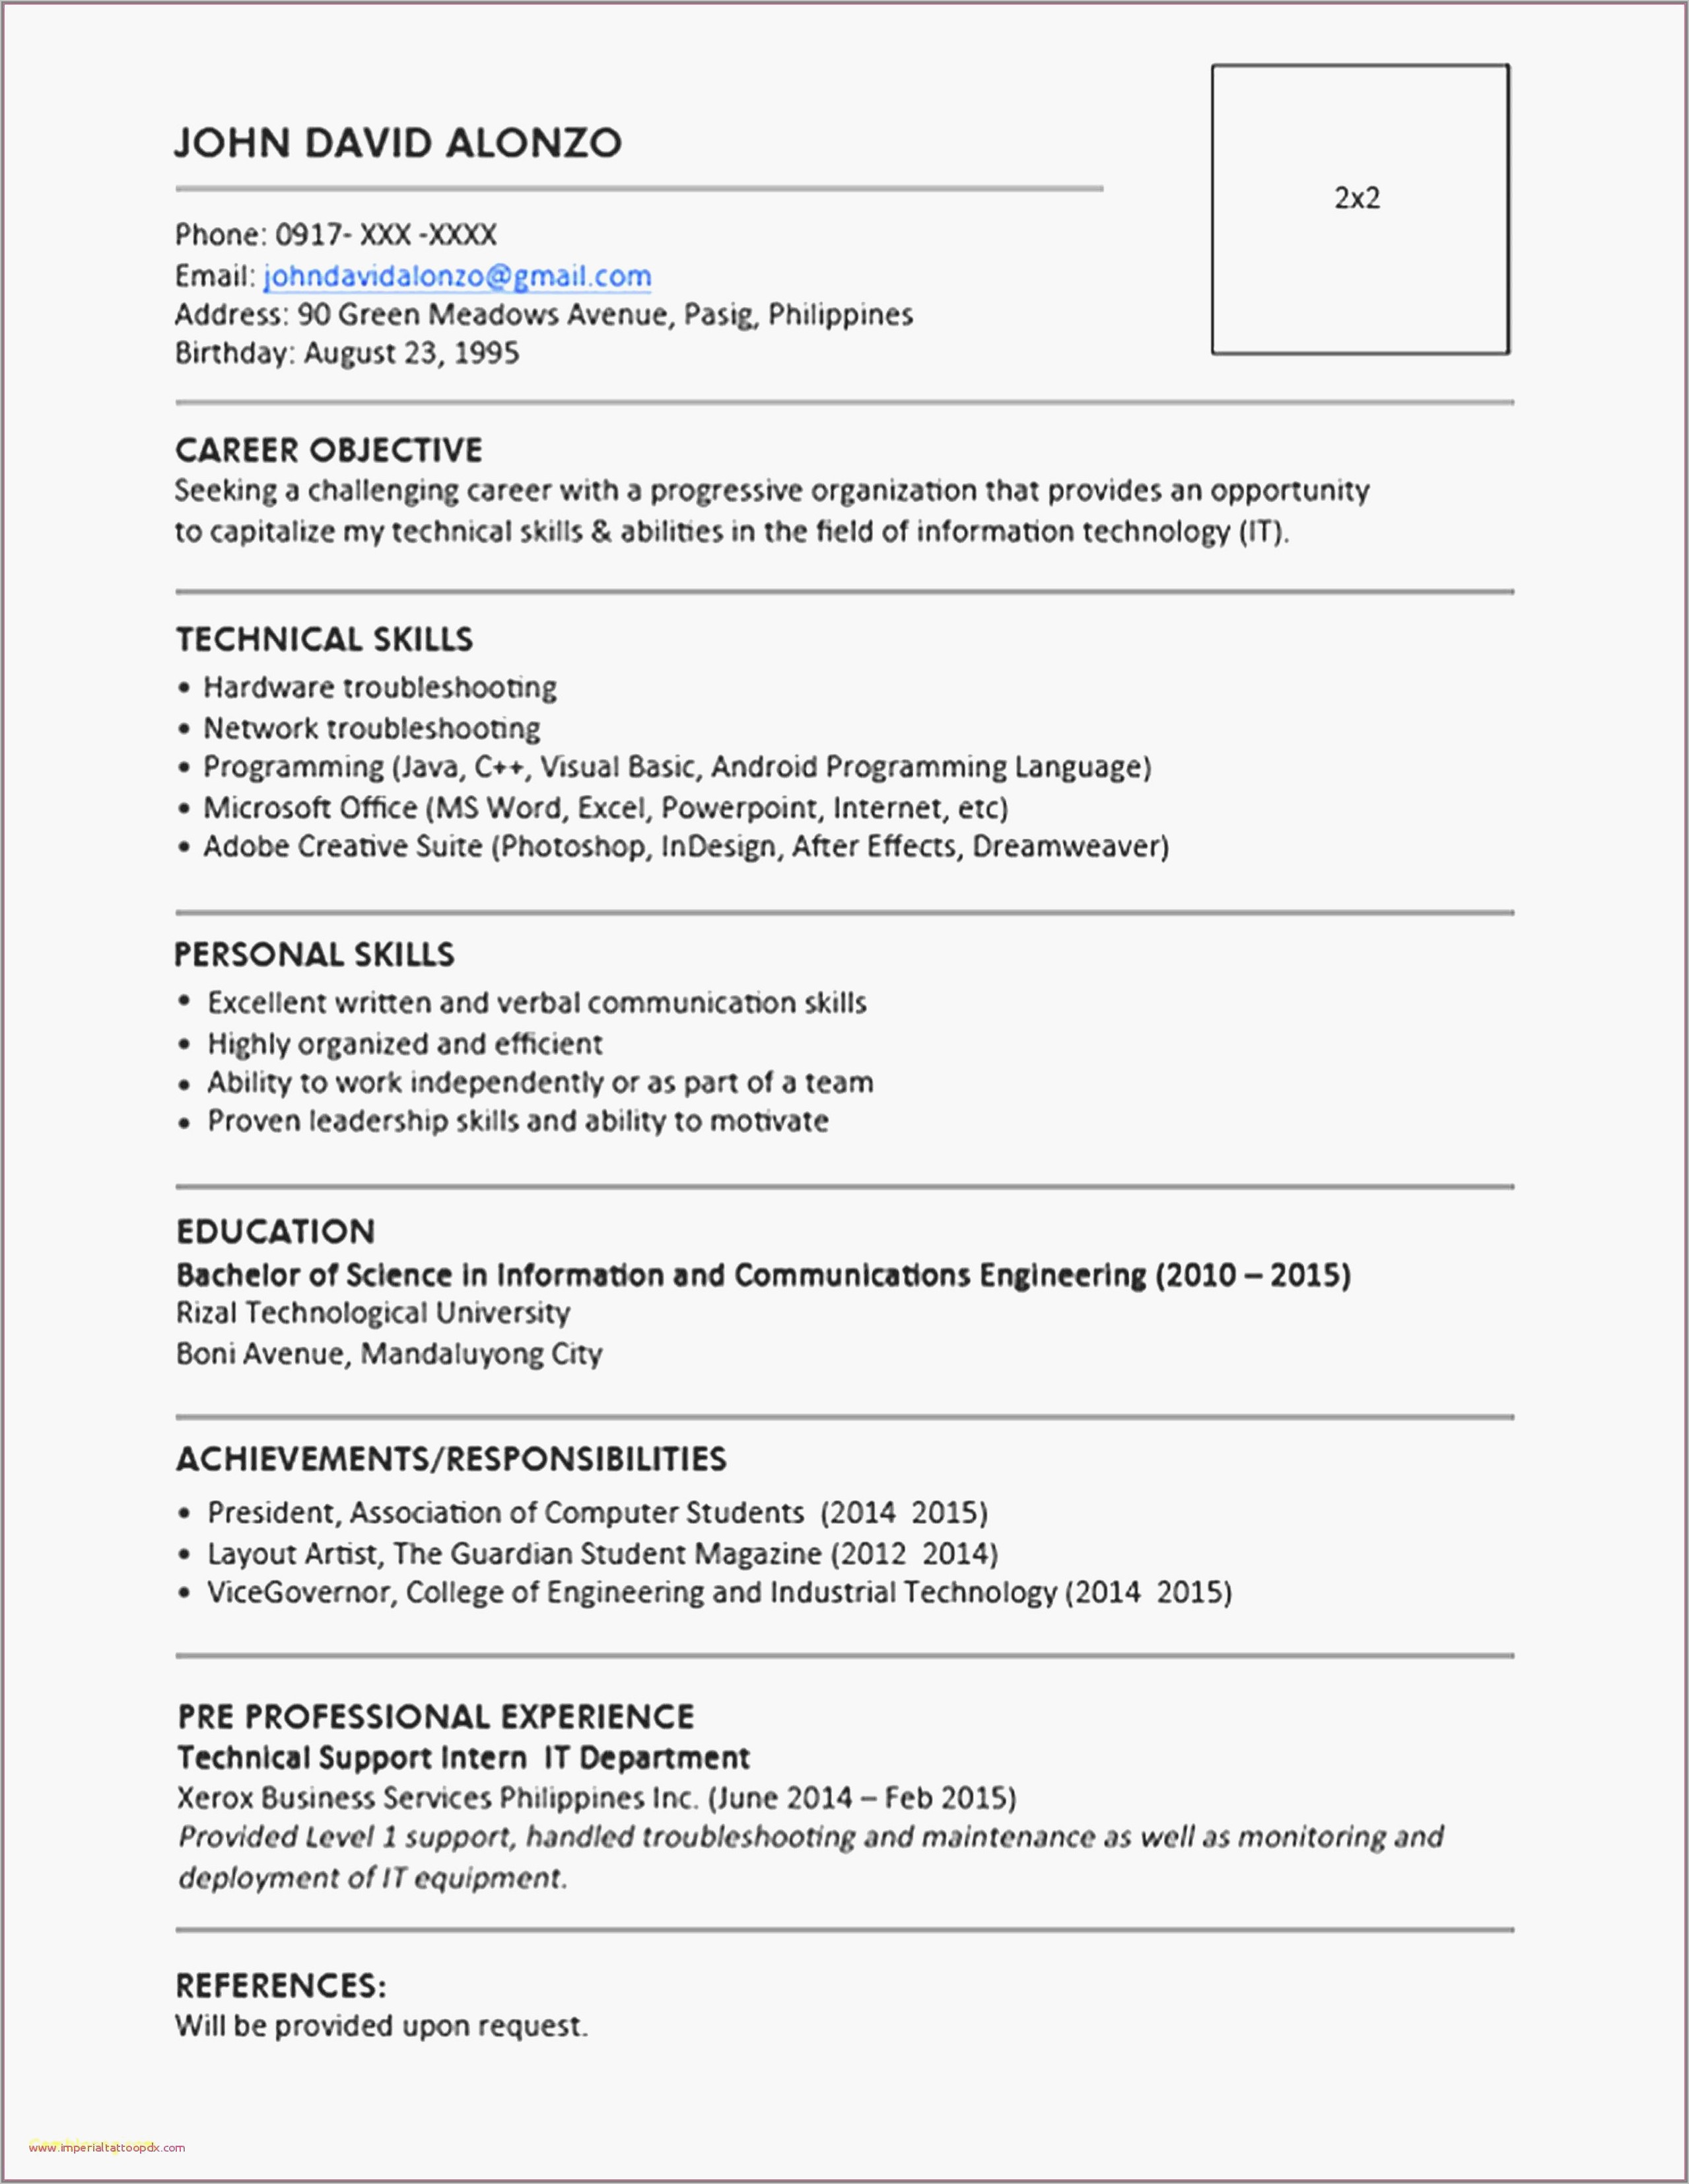 Resume Models For Freshers Ece Engineers